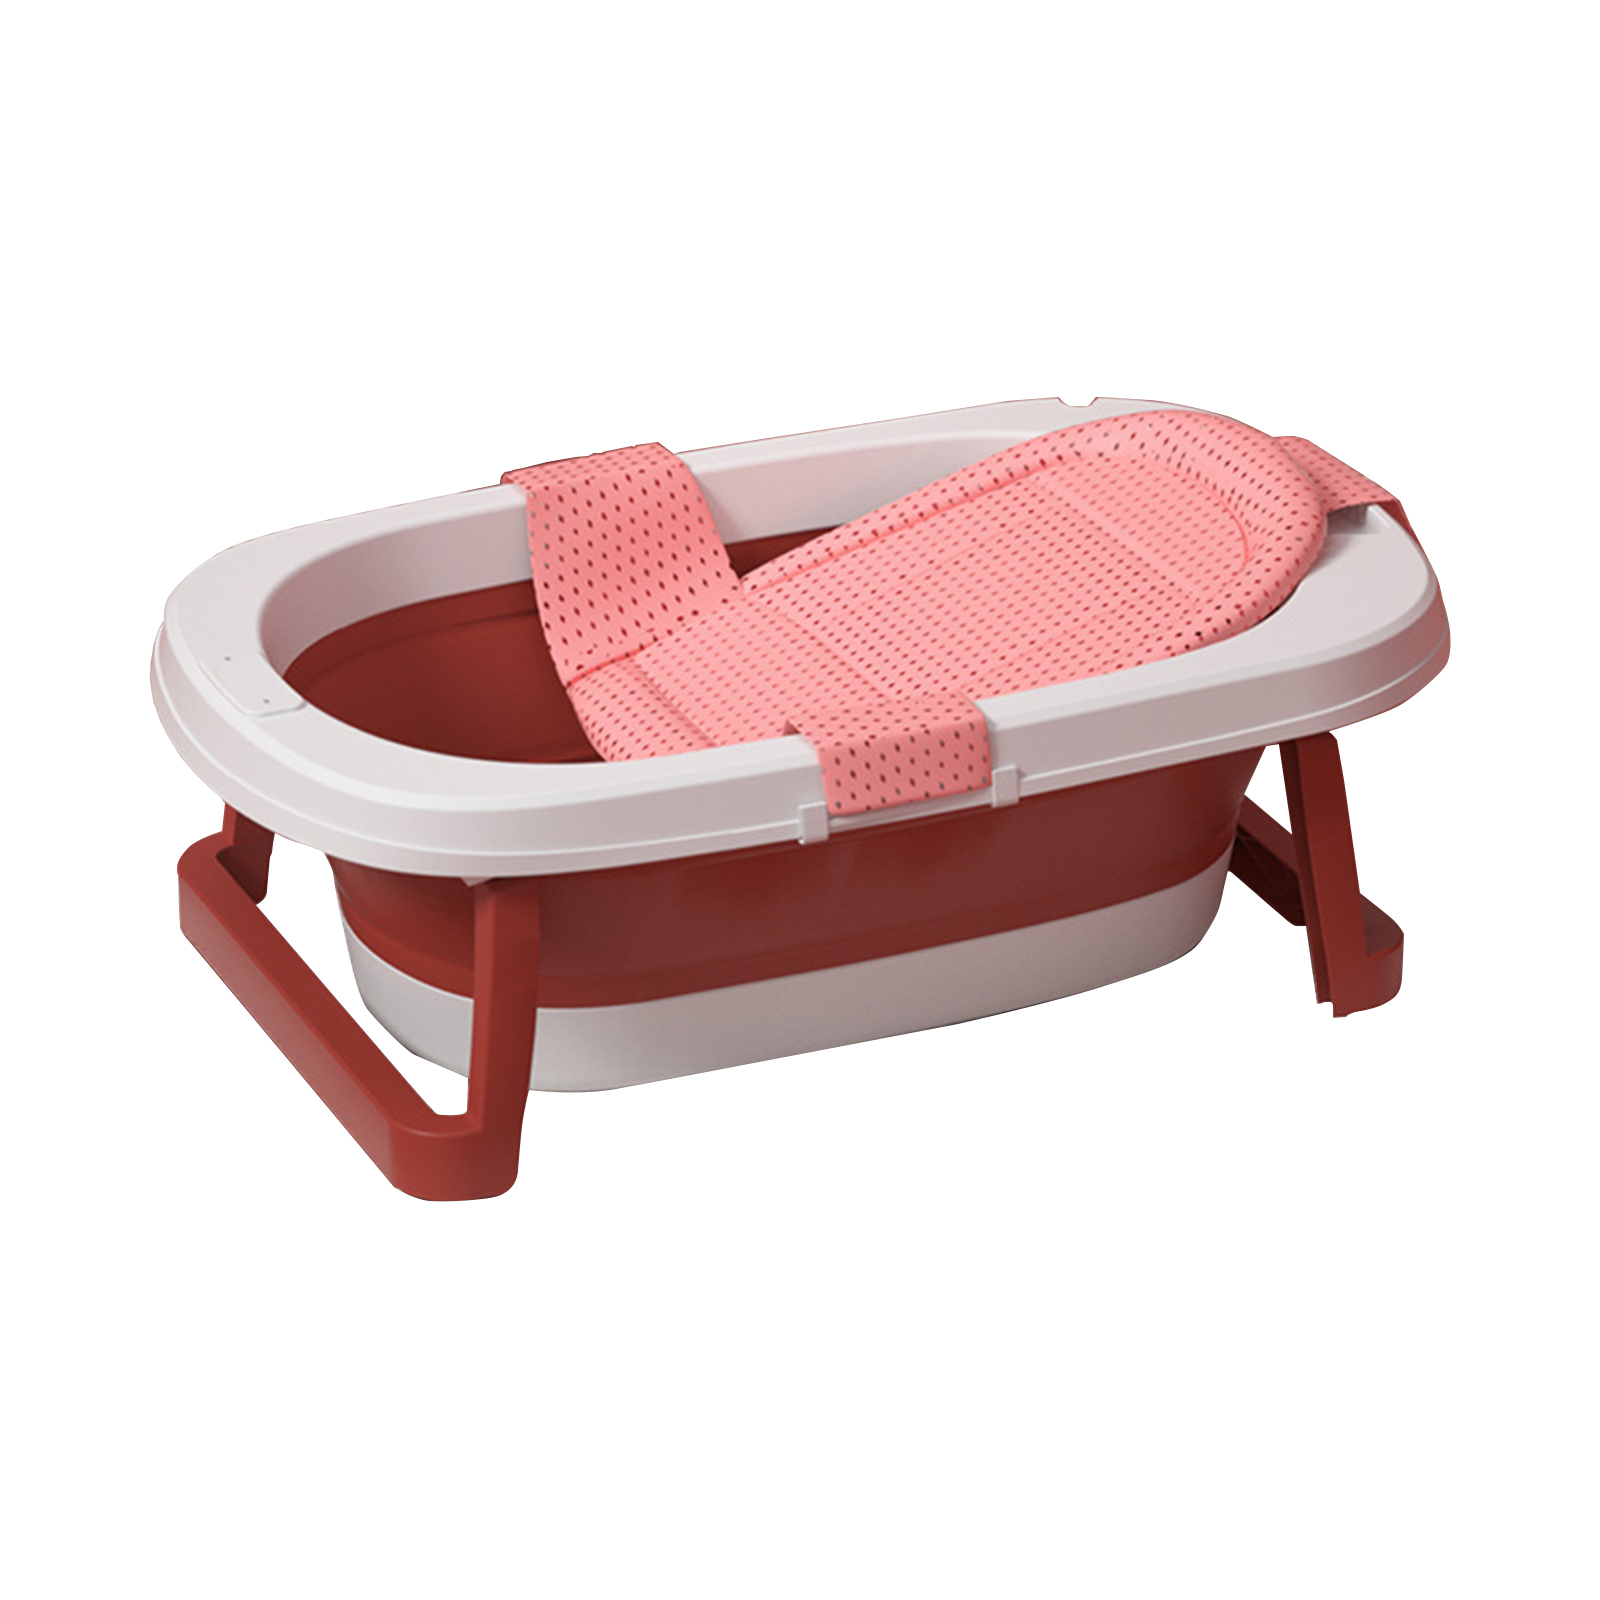 coral red Bath Net Water thermometer